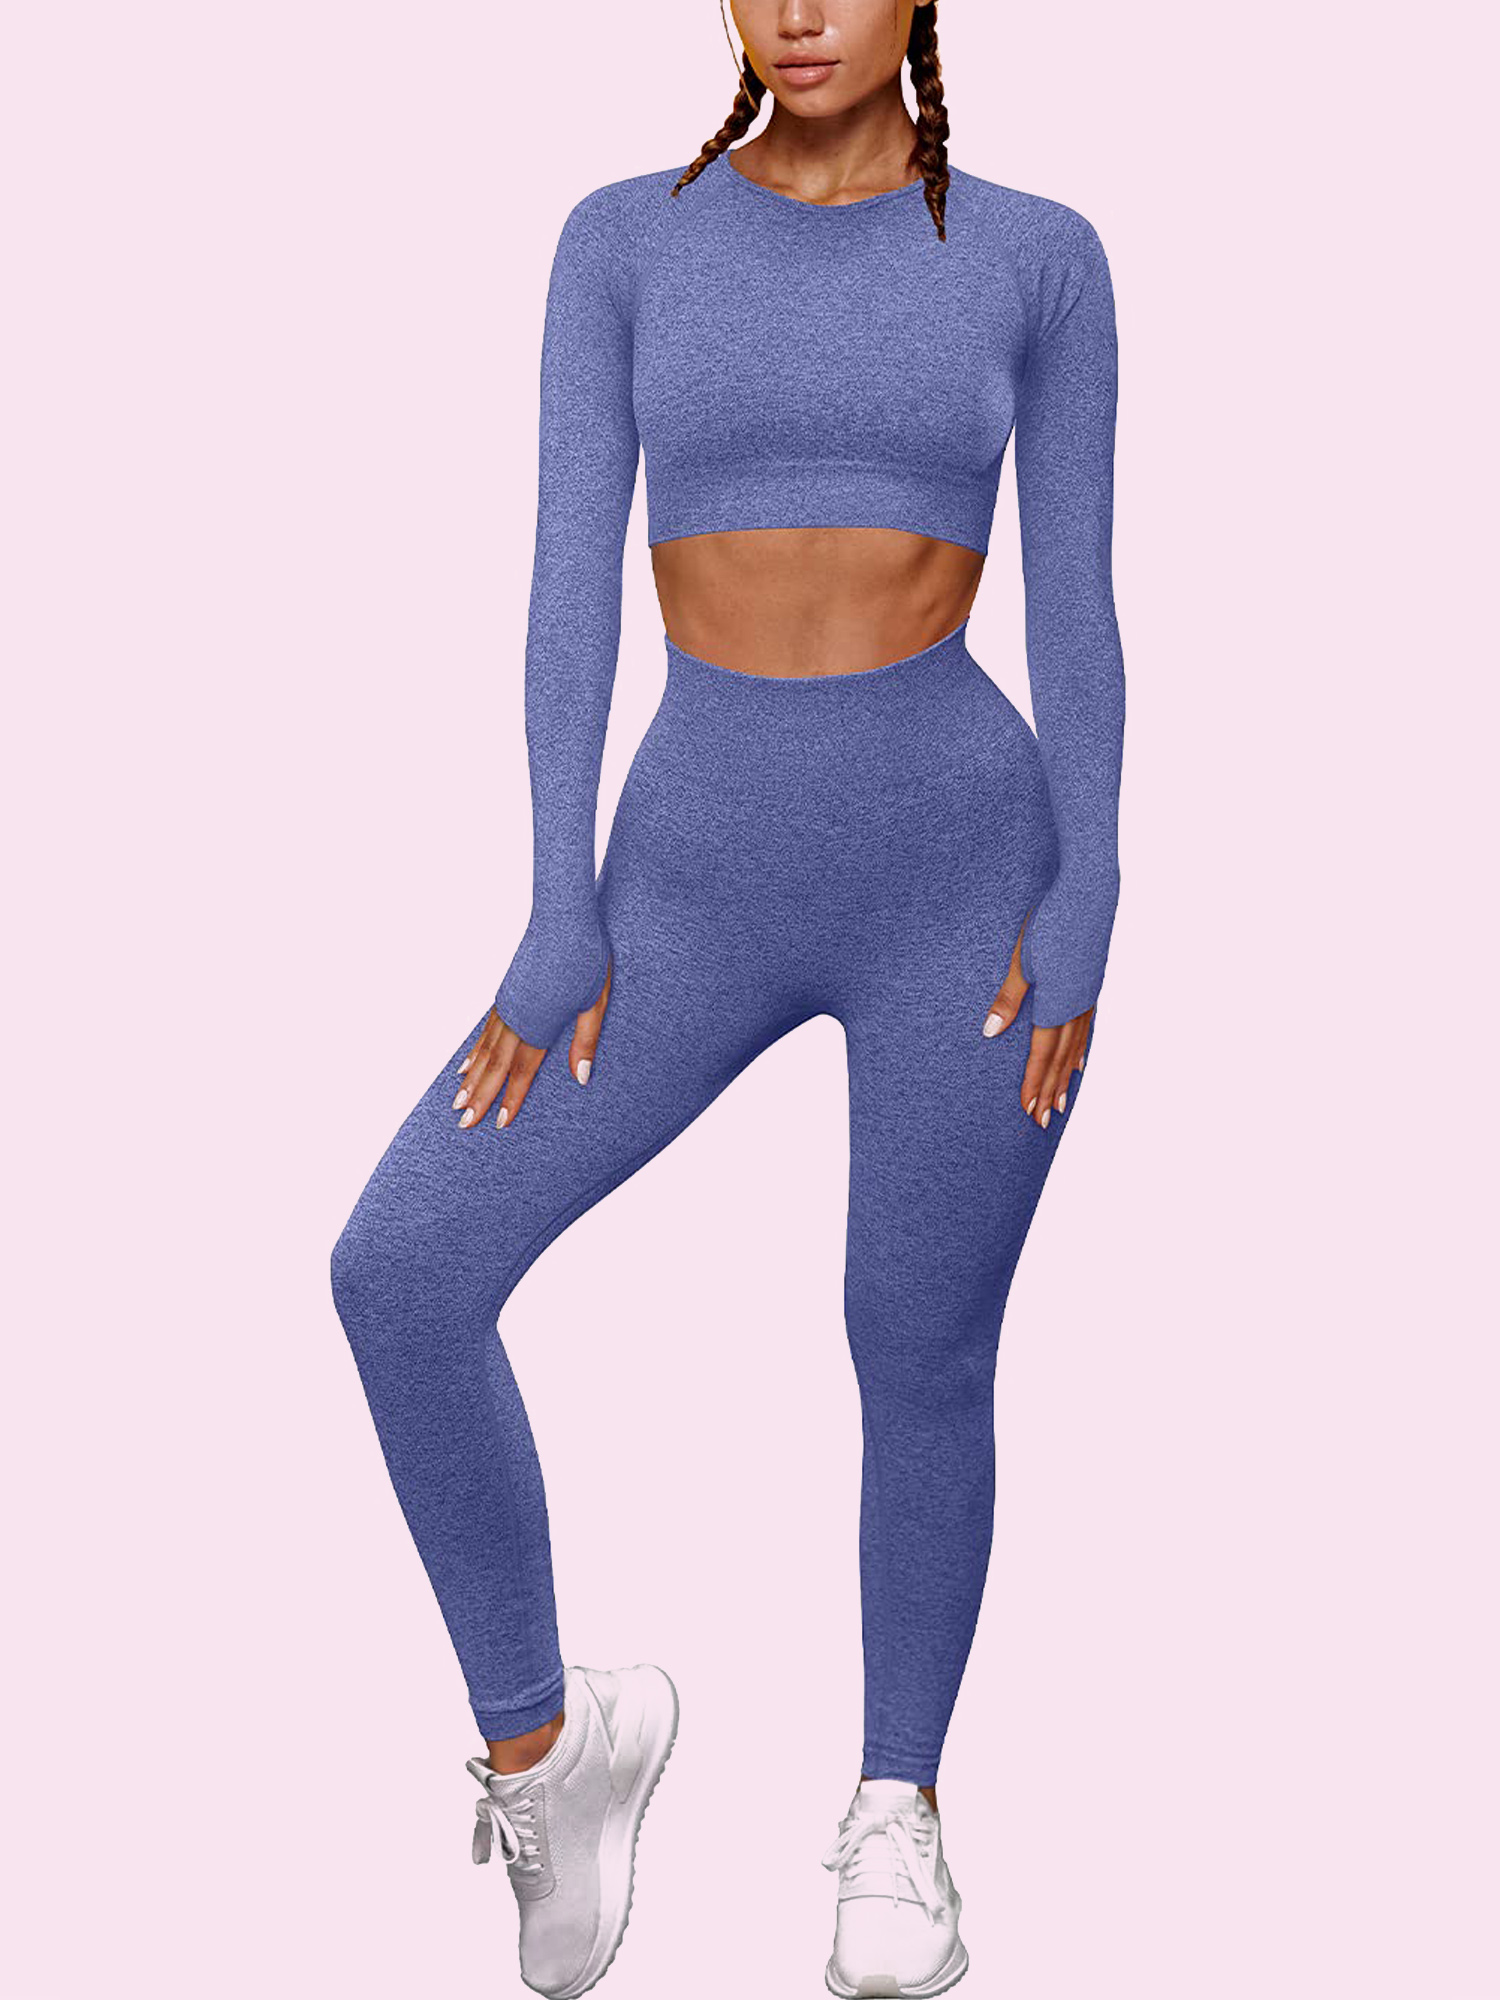 Legging and Top Sets, Legging and Crop Top Set